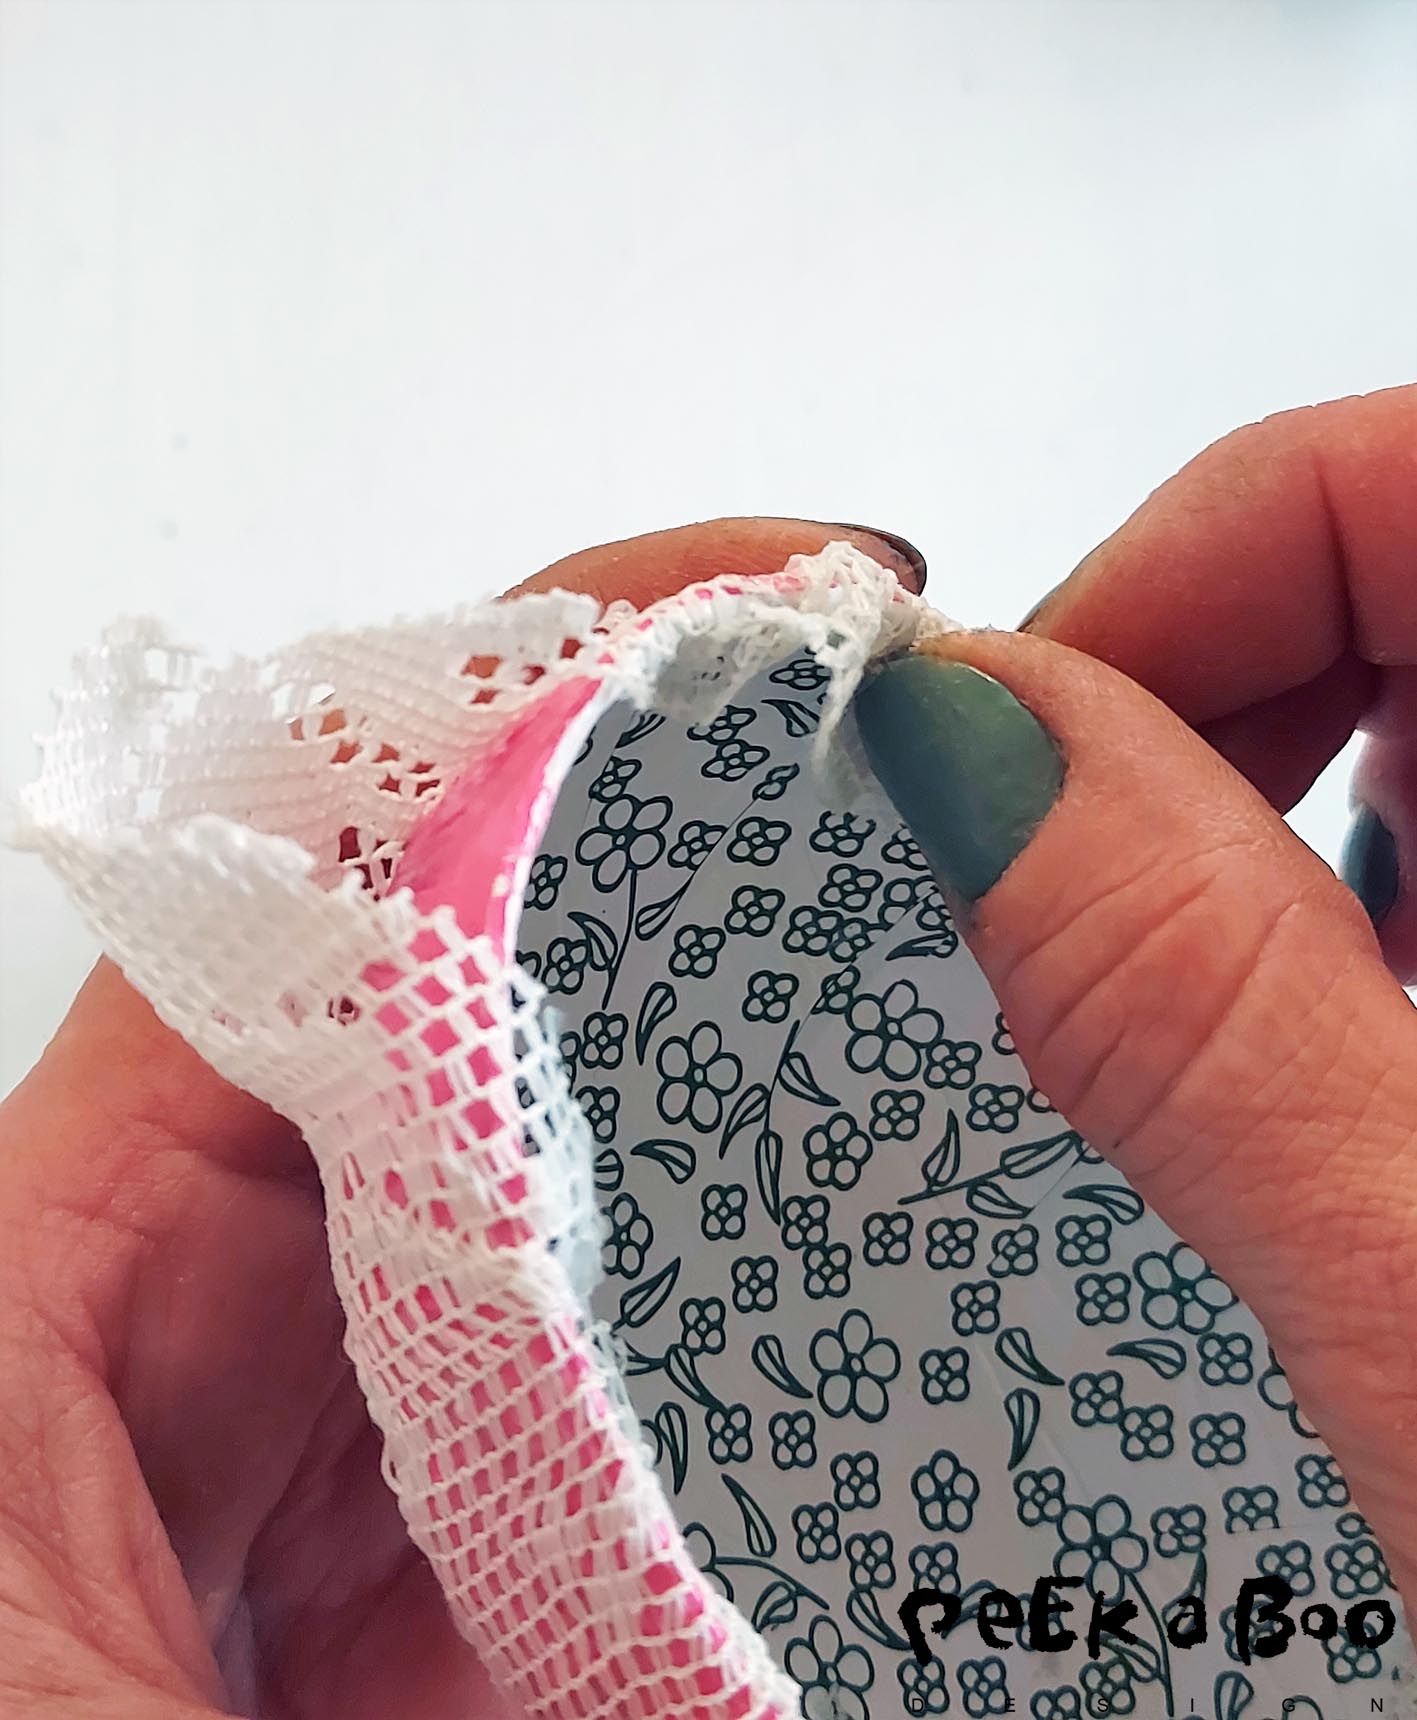 On this part of the egg you have to glue the lace inside the egg.